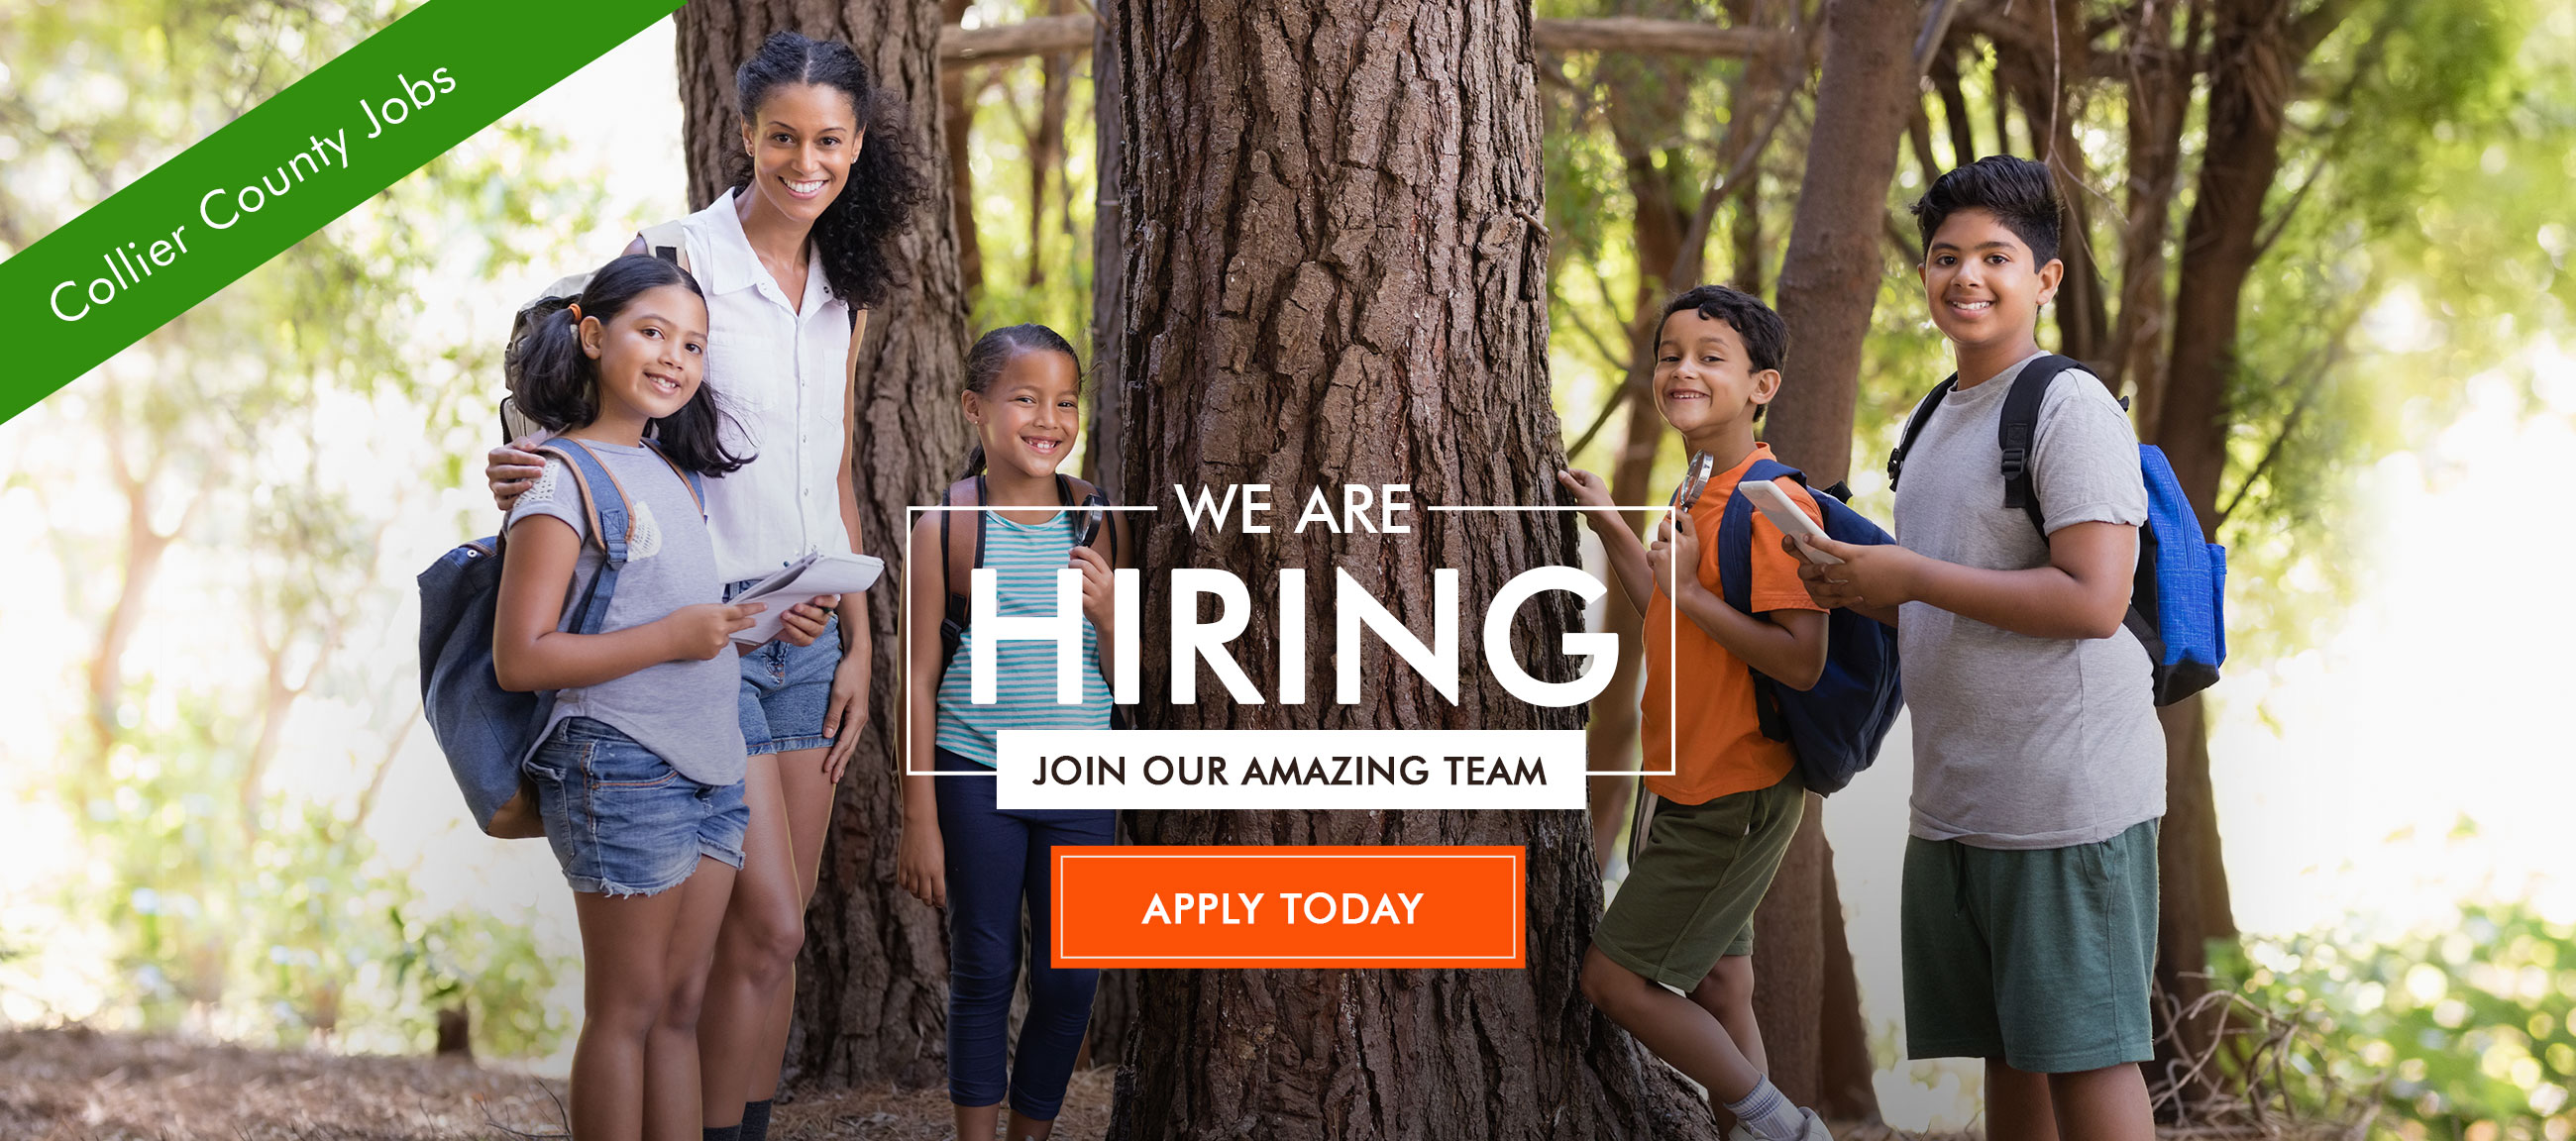 We Are Hiring Collier County Jobs Join Our Amazing Team, apply today